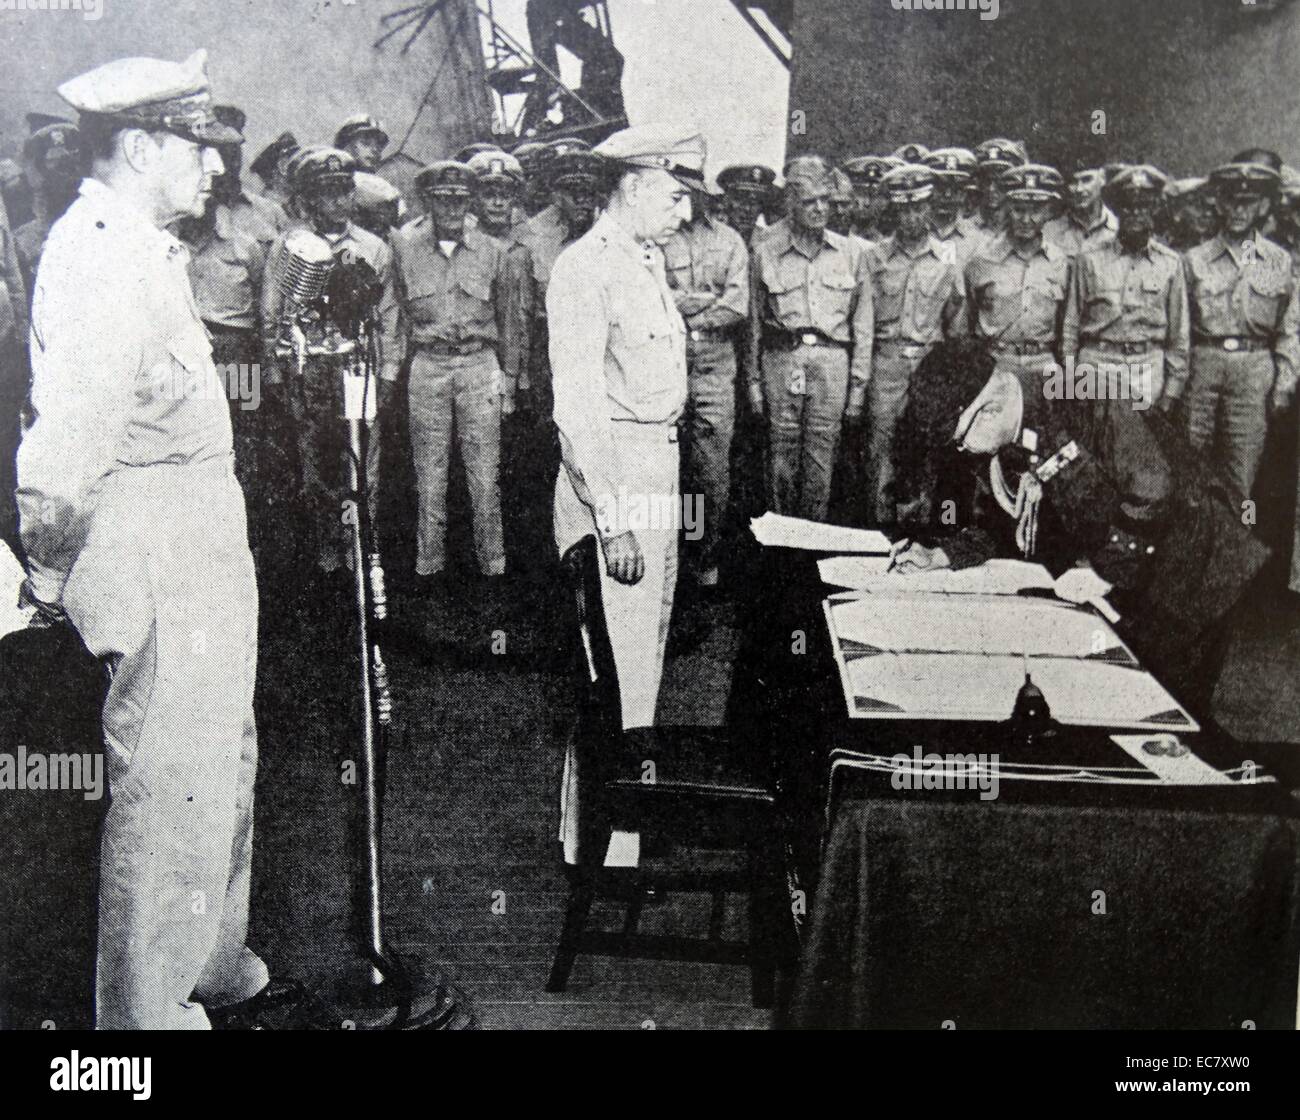 General Douglas MacArthur, Supreme Allied Commander (left) and other Allied military officers look on while Japanese General Yoshijiro Umezu signs surrender document in ceremony aboard the USS Missouri in Tokyo Bay, September 2nd, 1945. Stock Photo